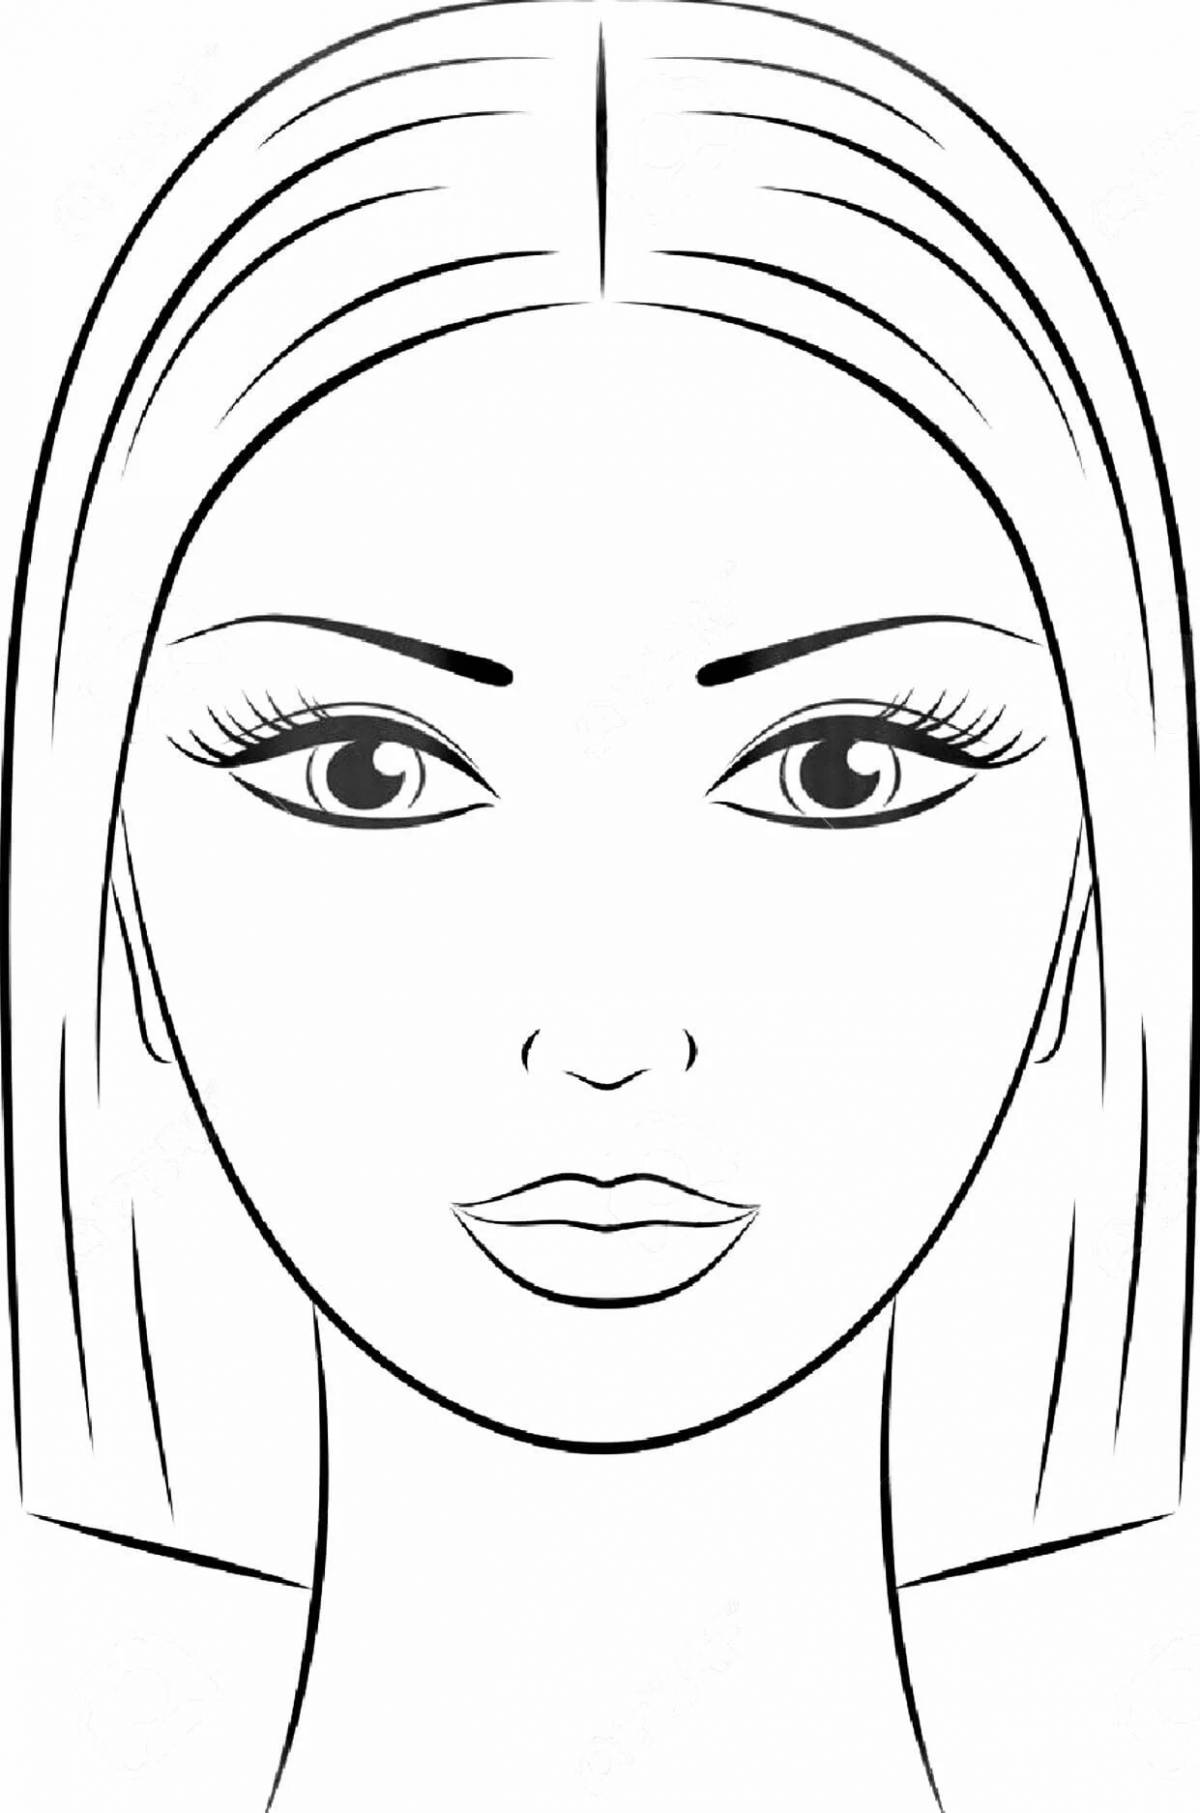 Color-explosion makeup girl coloring page